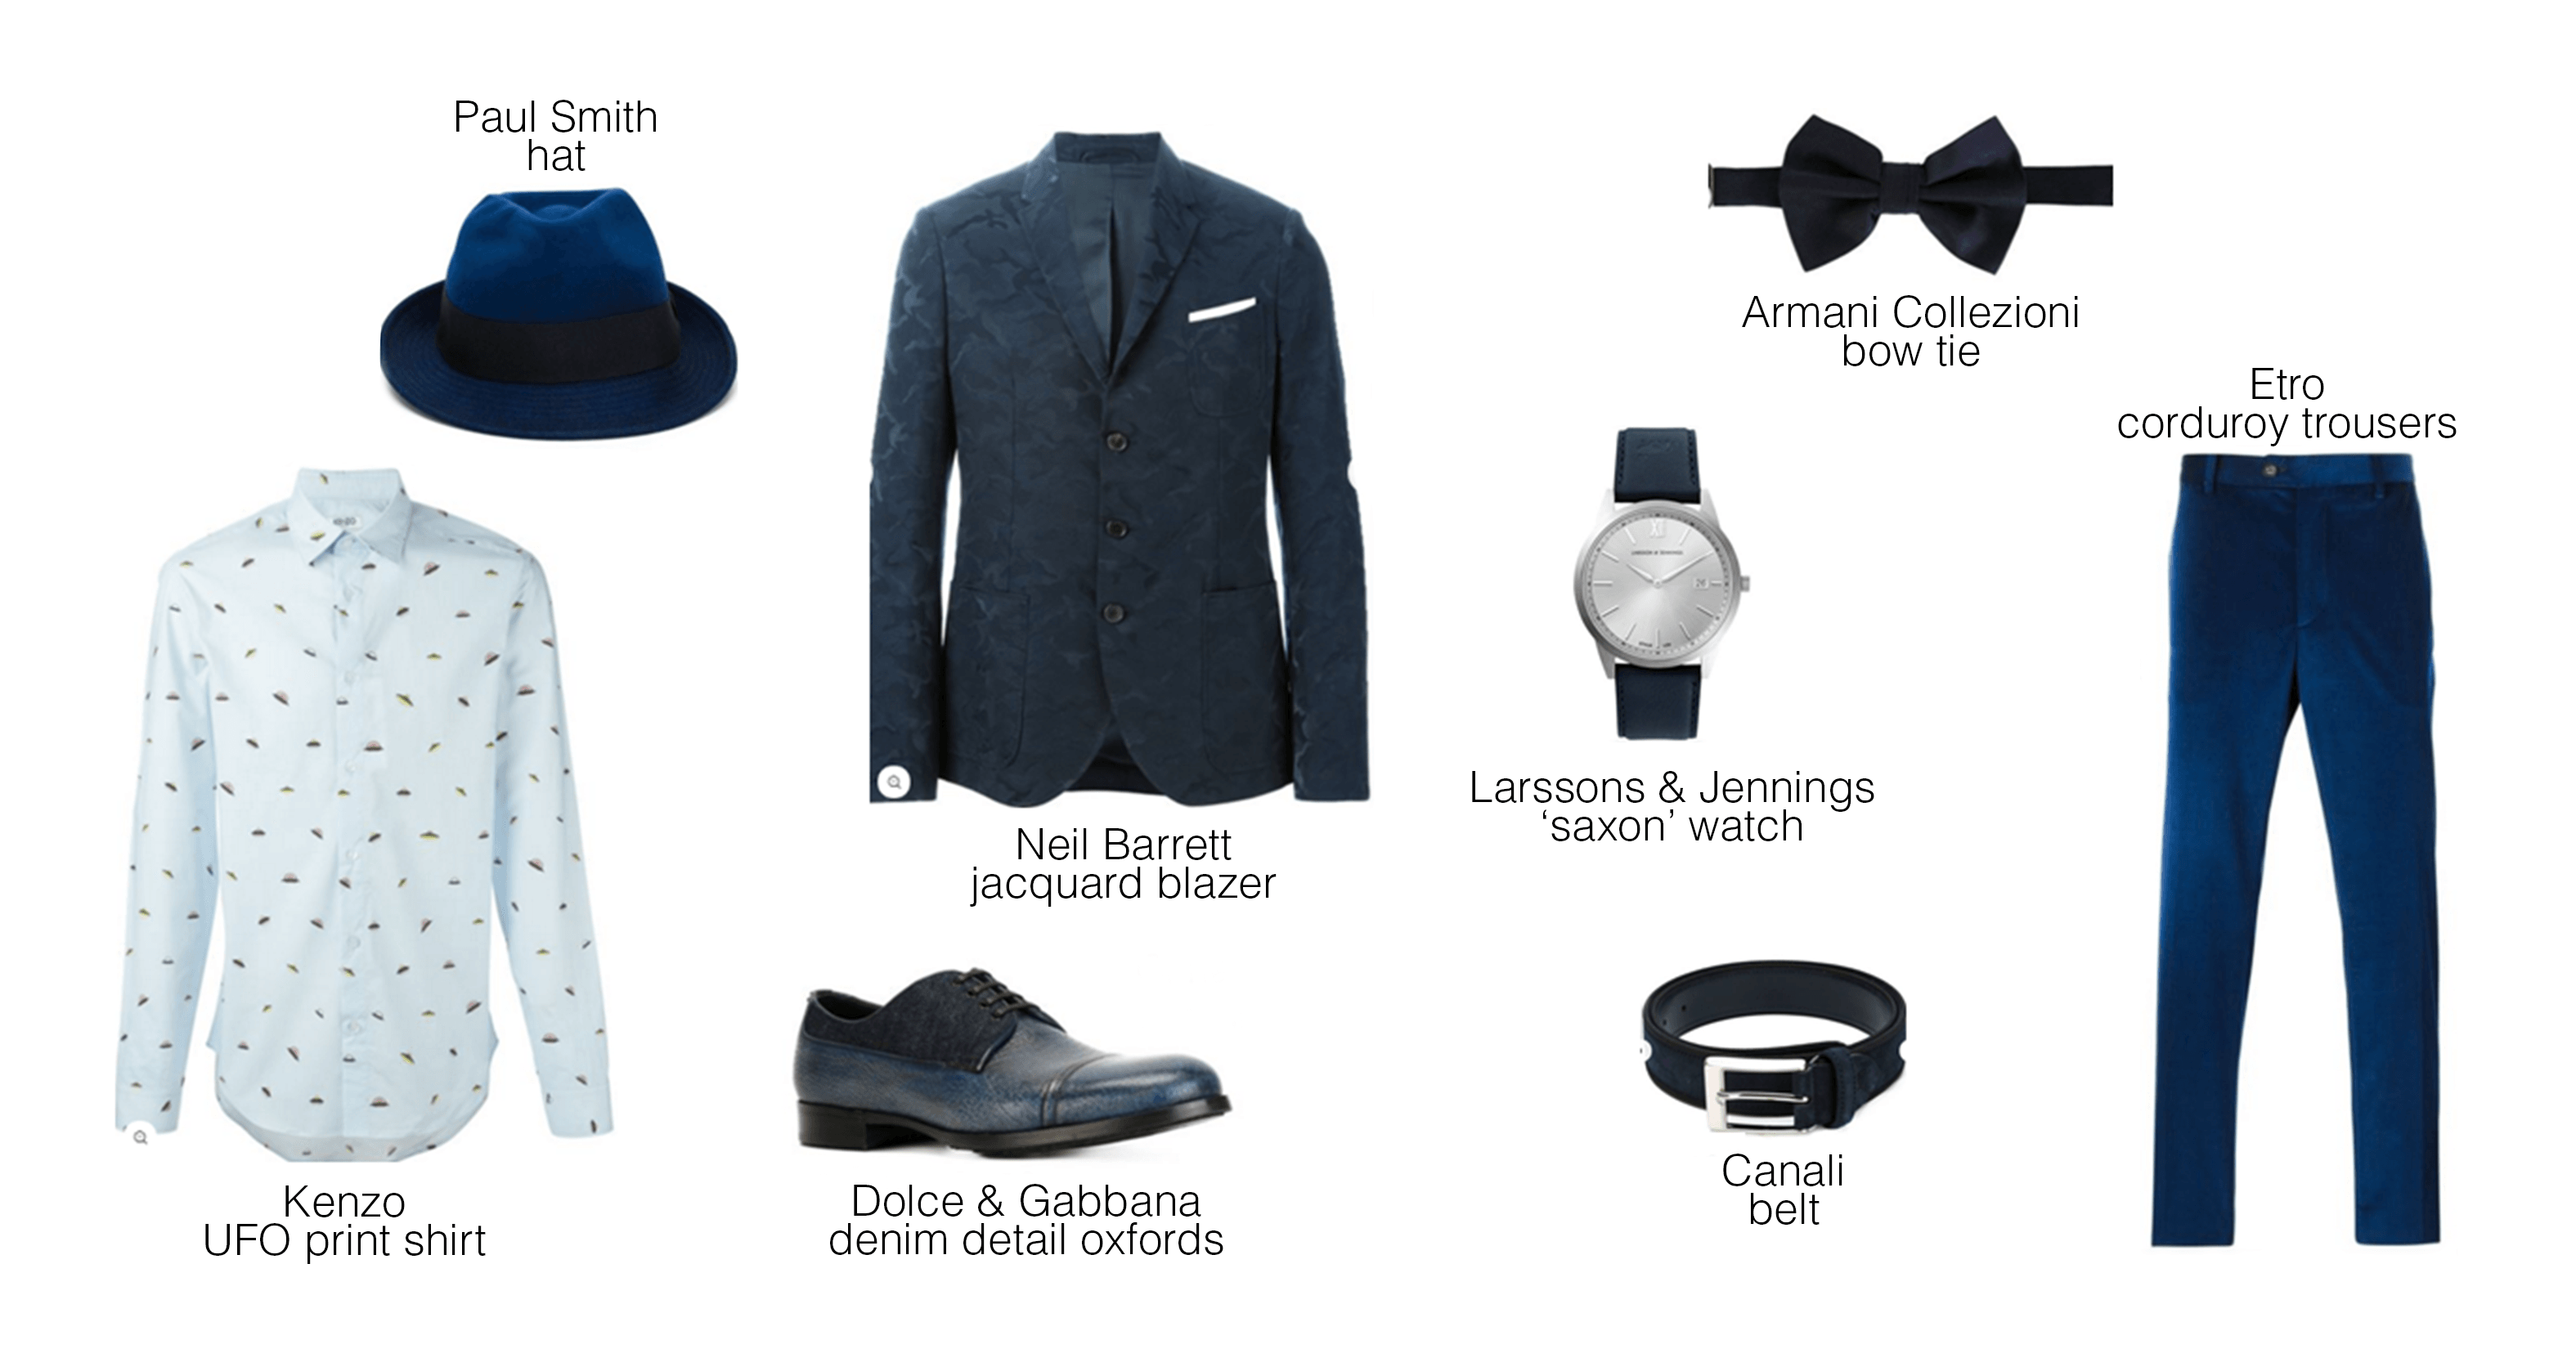 Last_Minute_New Years_Eve_Looks_for_Men_Preppy_Gentleman_Fashion_Style